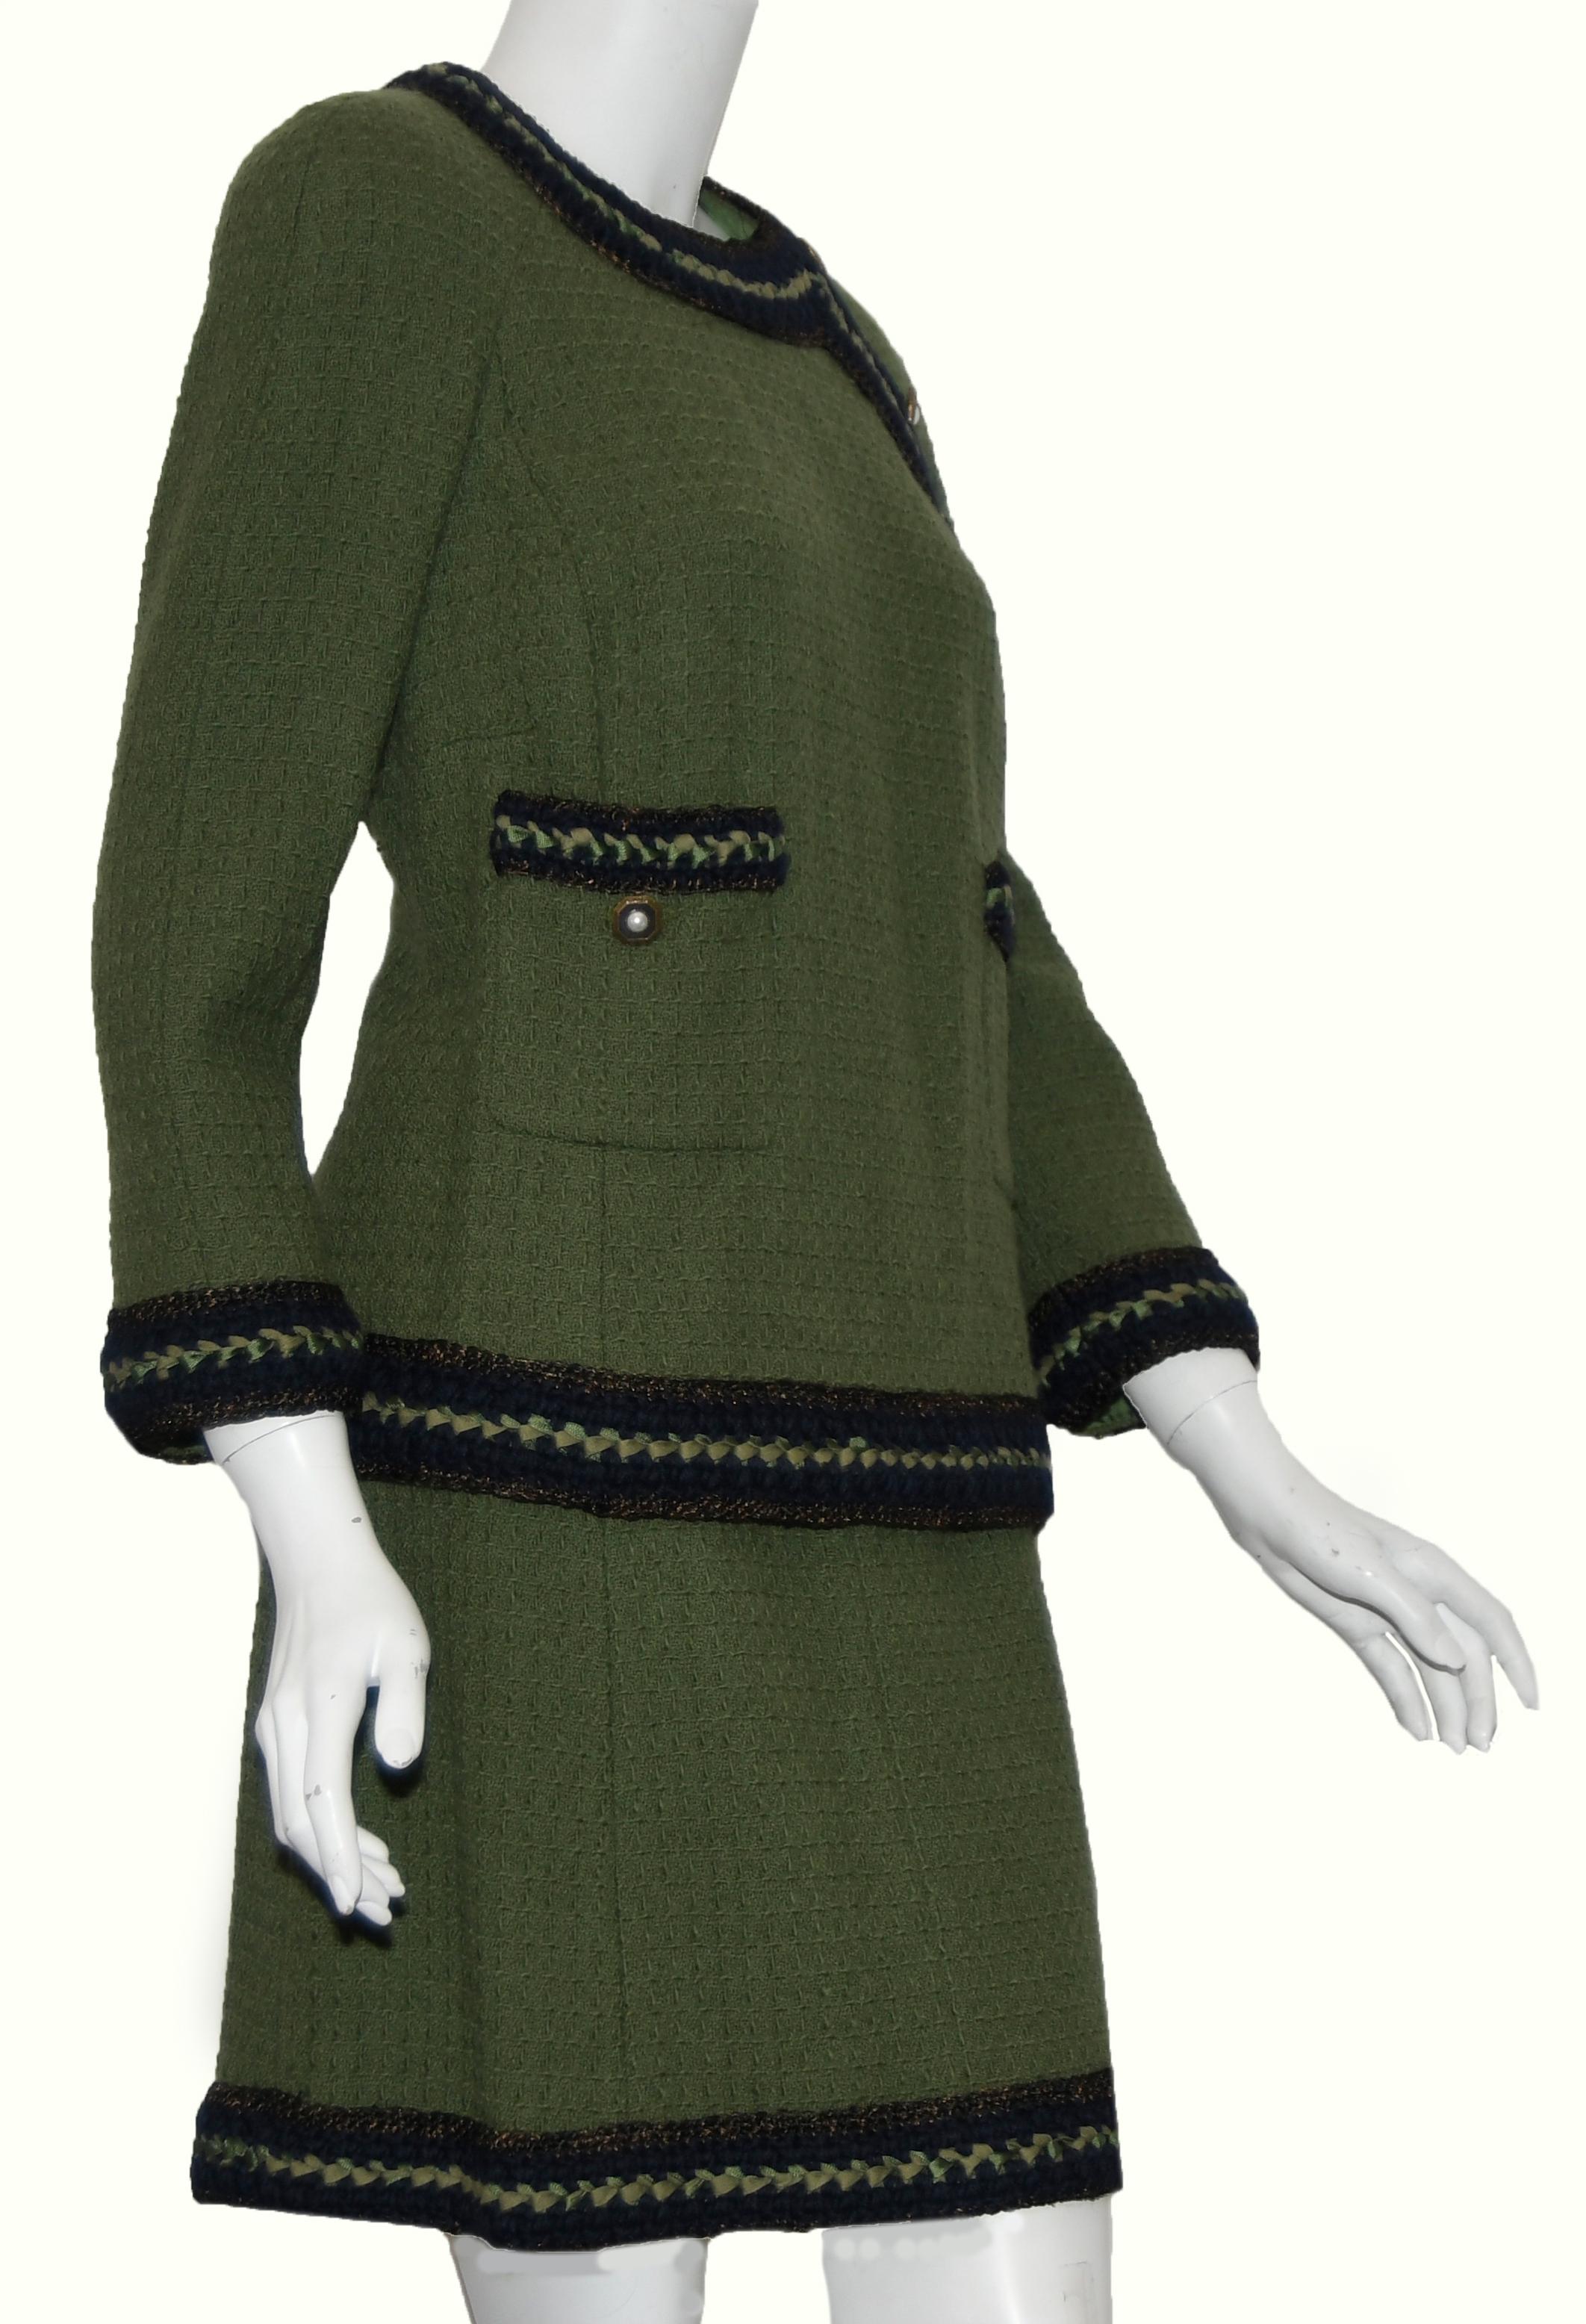 Chanel olive green skirt suit includes navy blue trim on sleeves, cuffs and hem of jacket and skirt.  The navy trim is accentuated with green ribbon and gold tone faux pearl buttons.  The skirt has a back zipper for closure and the top, 3 buttons